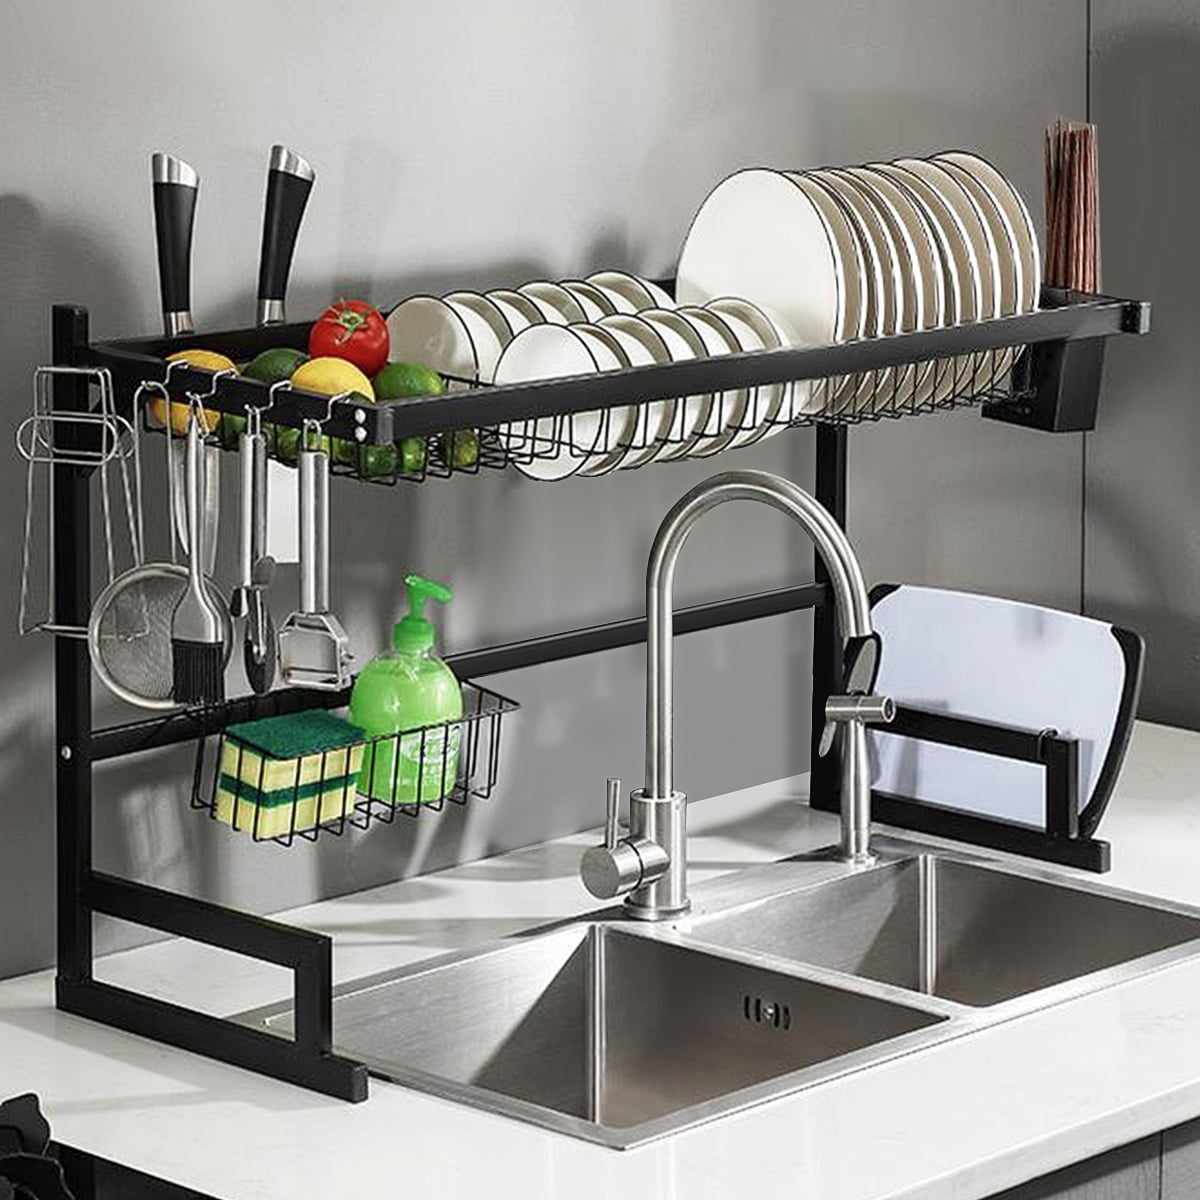 Stainless Steel 2 Tier Dish Drying Rack - Over Sink, Drainer Shelf Stainless Steel Drying Rack Over Sink